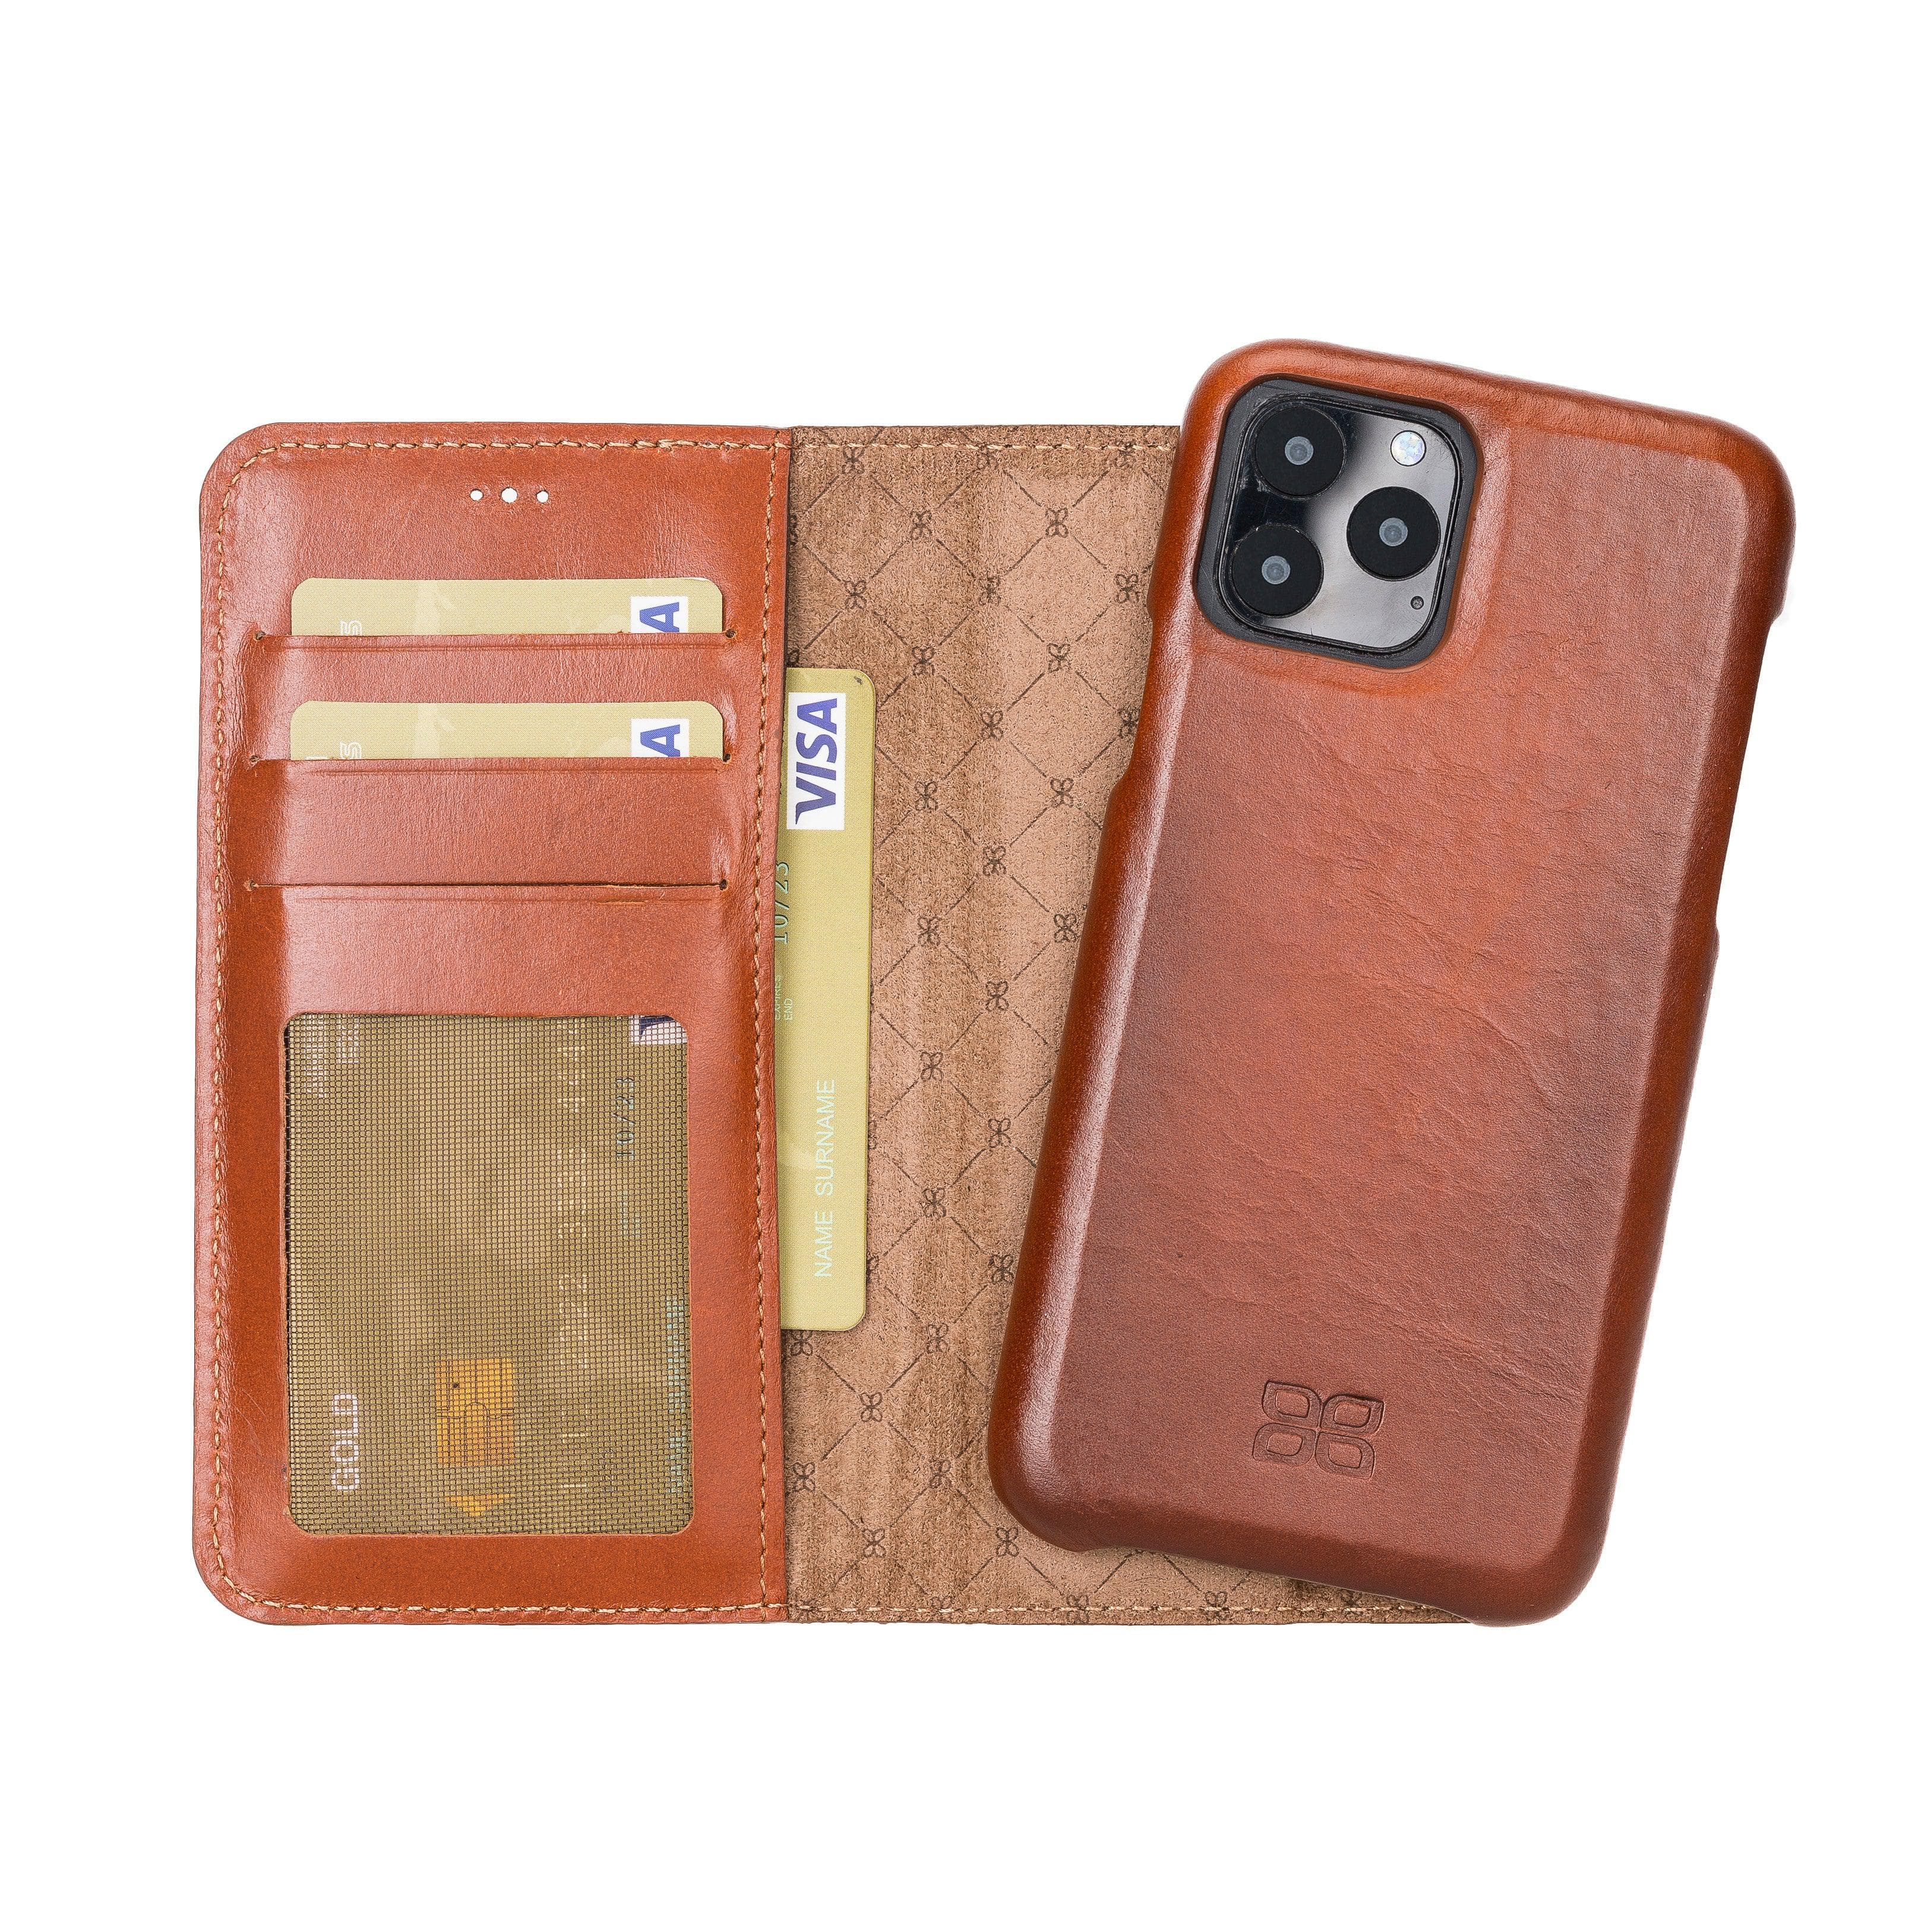 Detachable Fully Covering Leather Wallet Case For Apple iPhone 11 Series iPhone 11 Pro / Tan Bouletta LTD